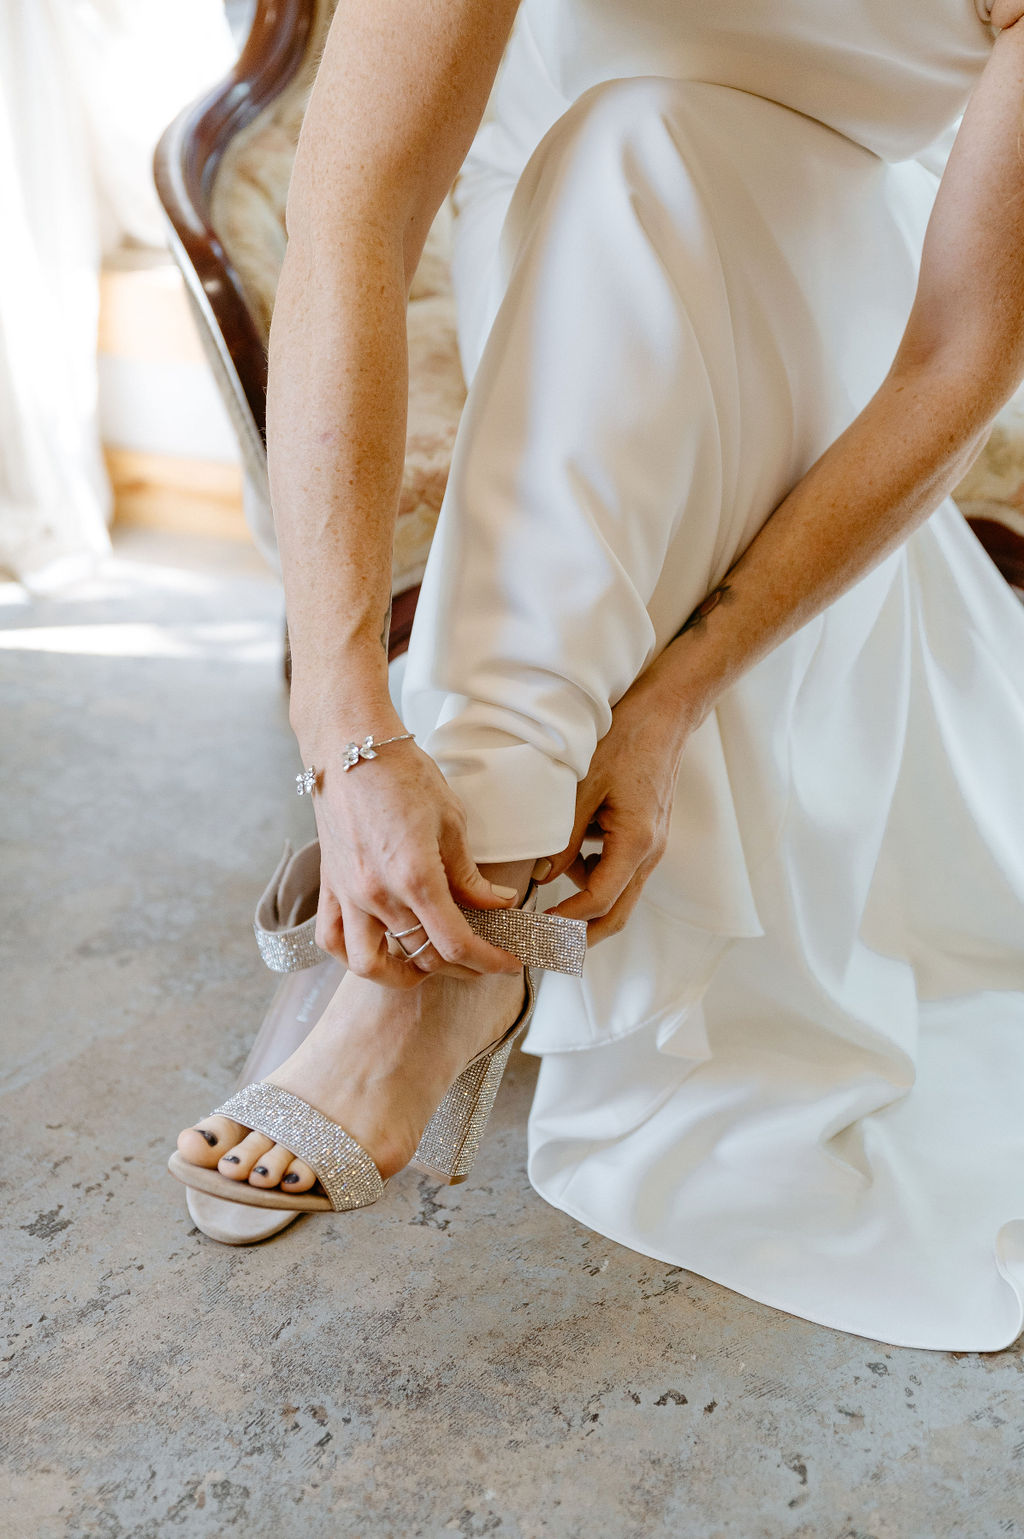 Bride gets her dress and shoes on for her wedding at river bend in colorado